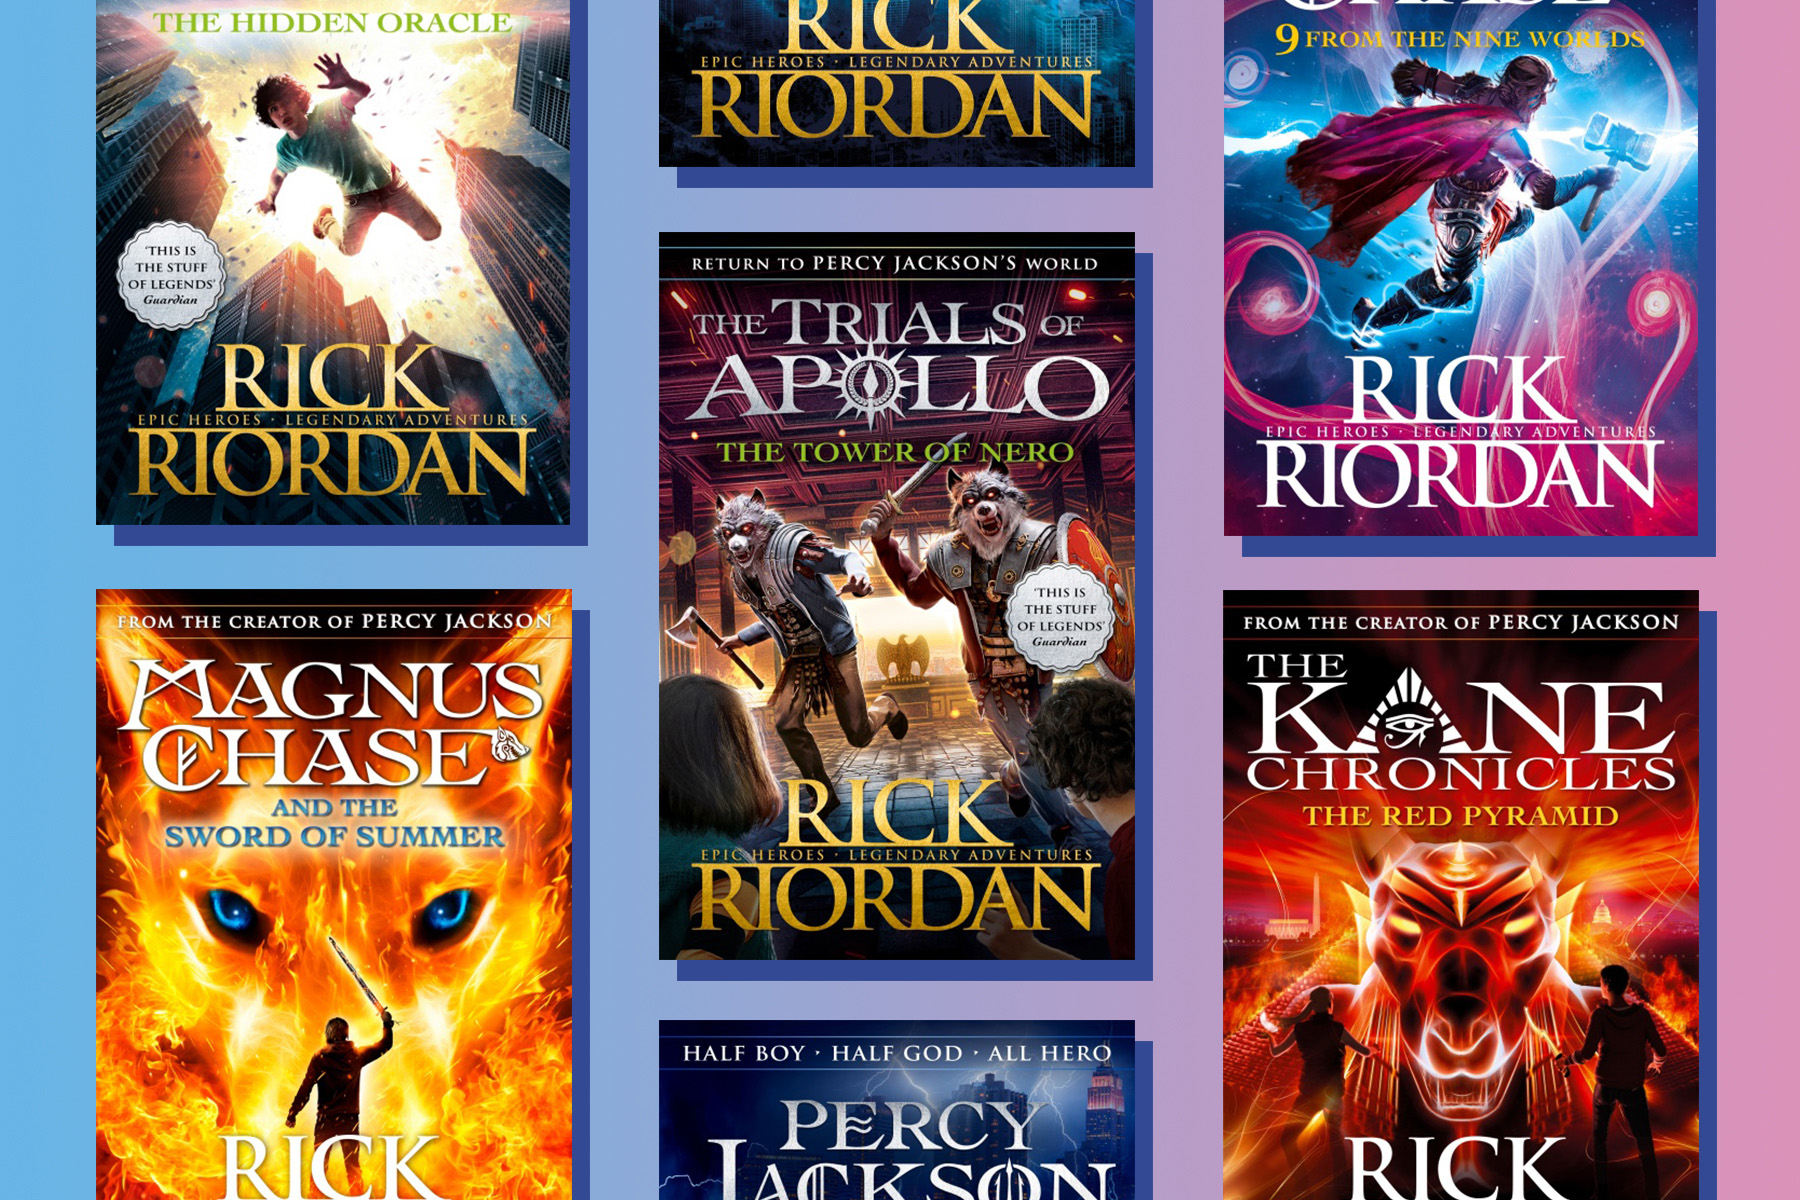 A selection of Rick Riordan's books on a blue and pink faded background